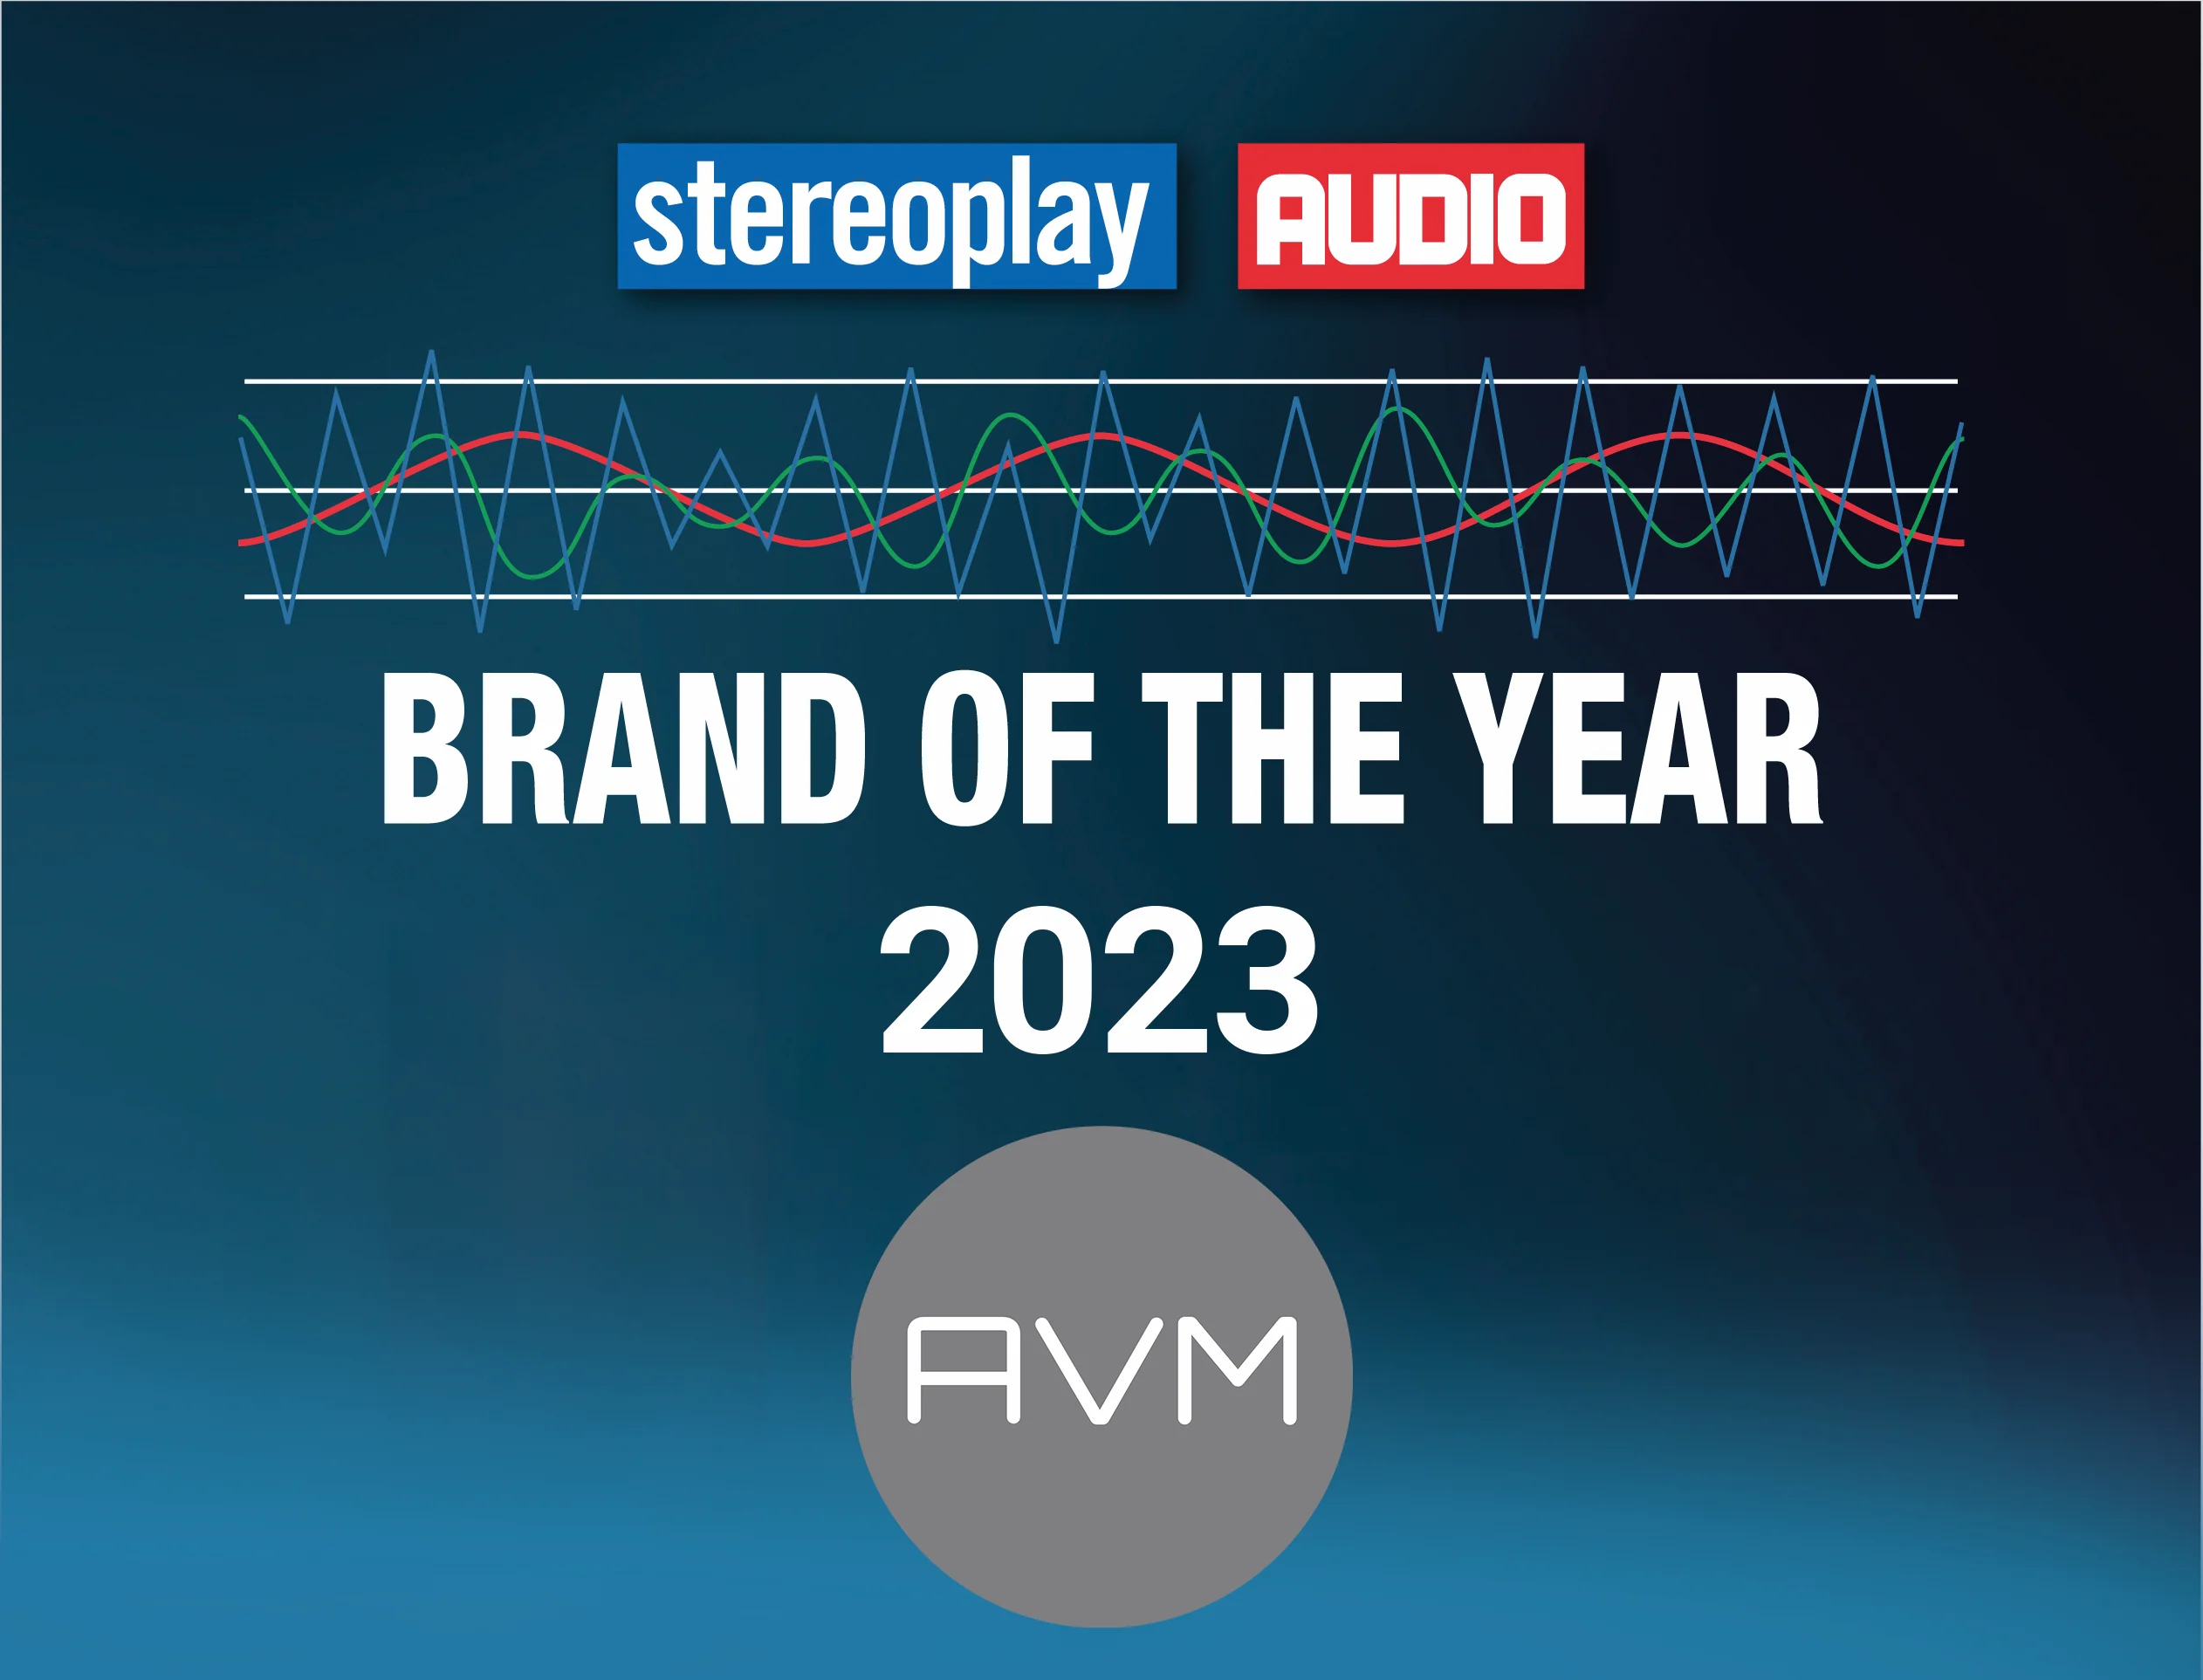 AVM Audio Brand Of The Year 2023 Stereoplay Audio Golden Ears Award